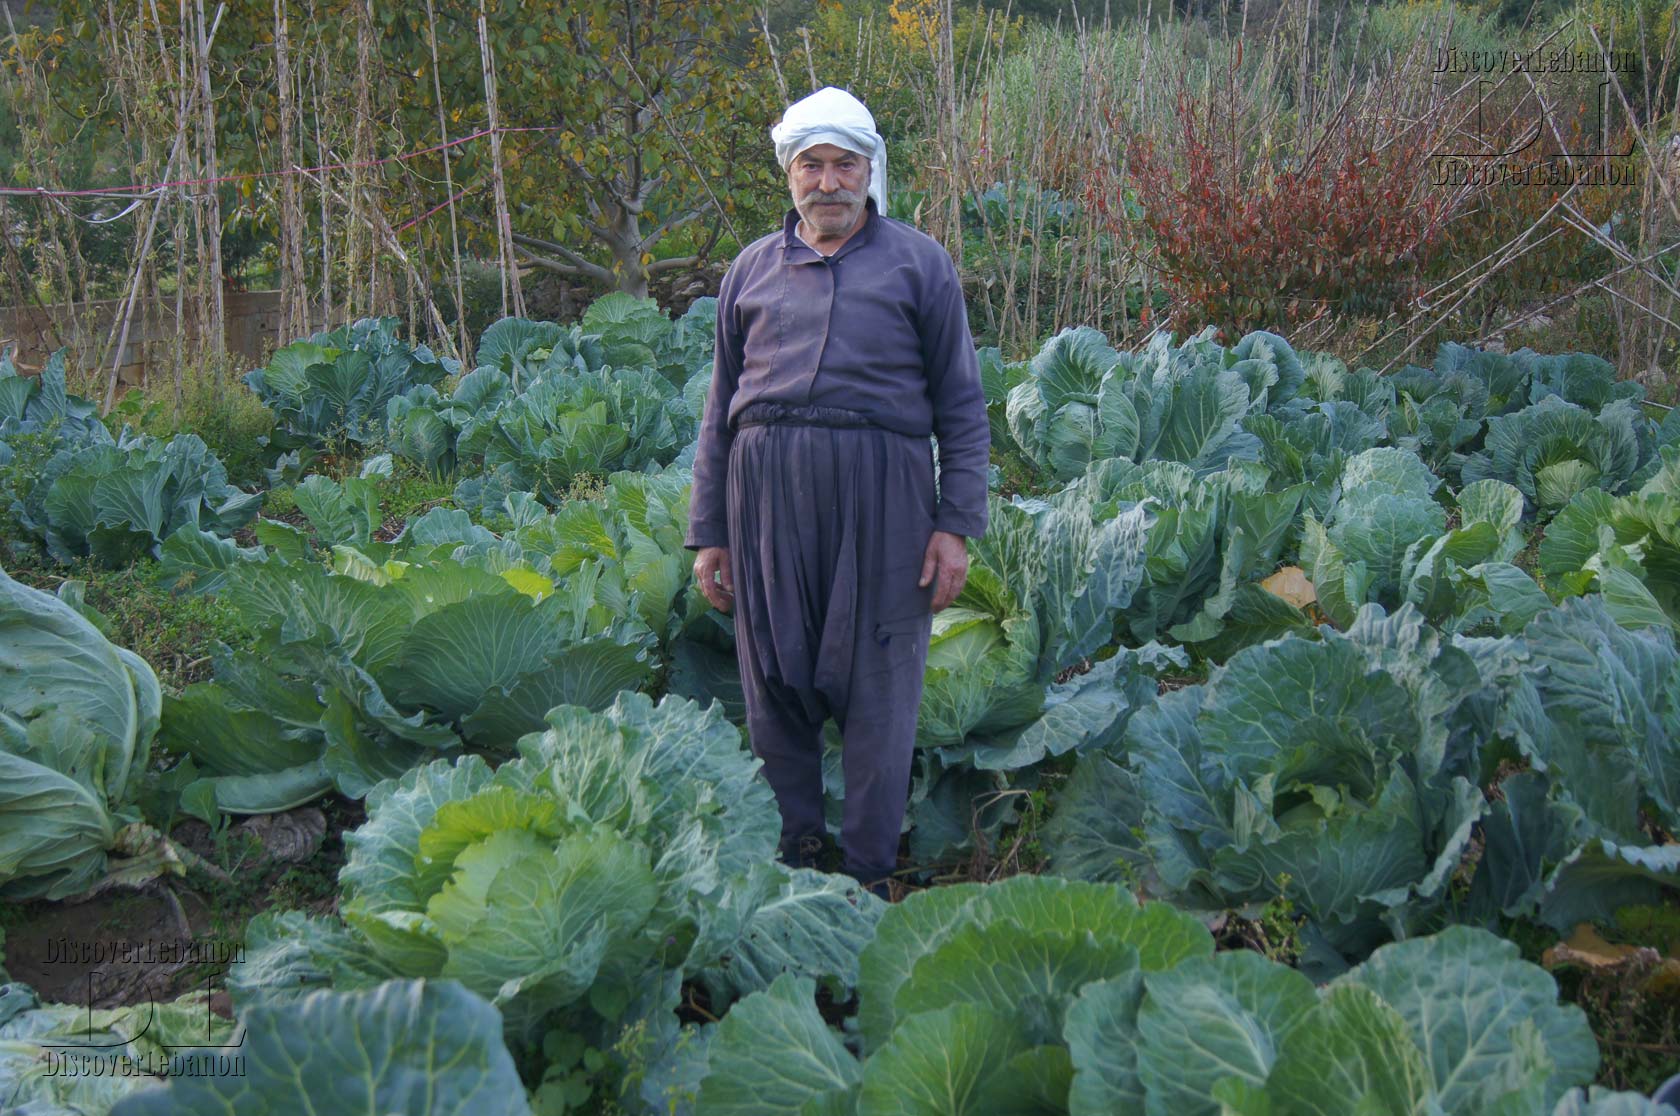 Lebanese Peasant costume working on agriculture